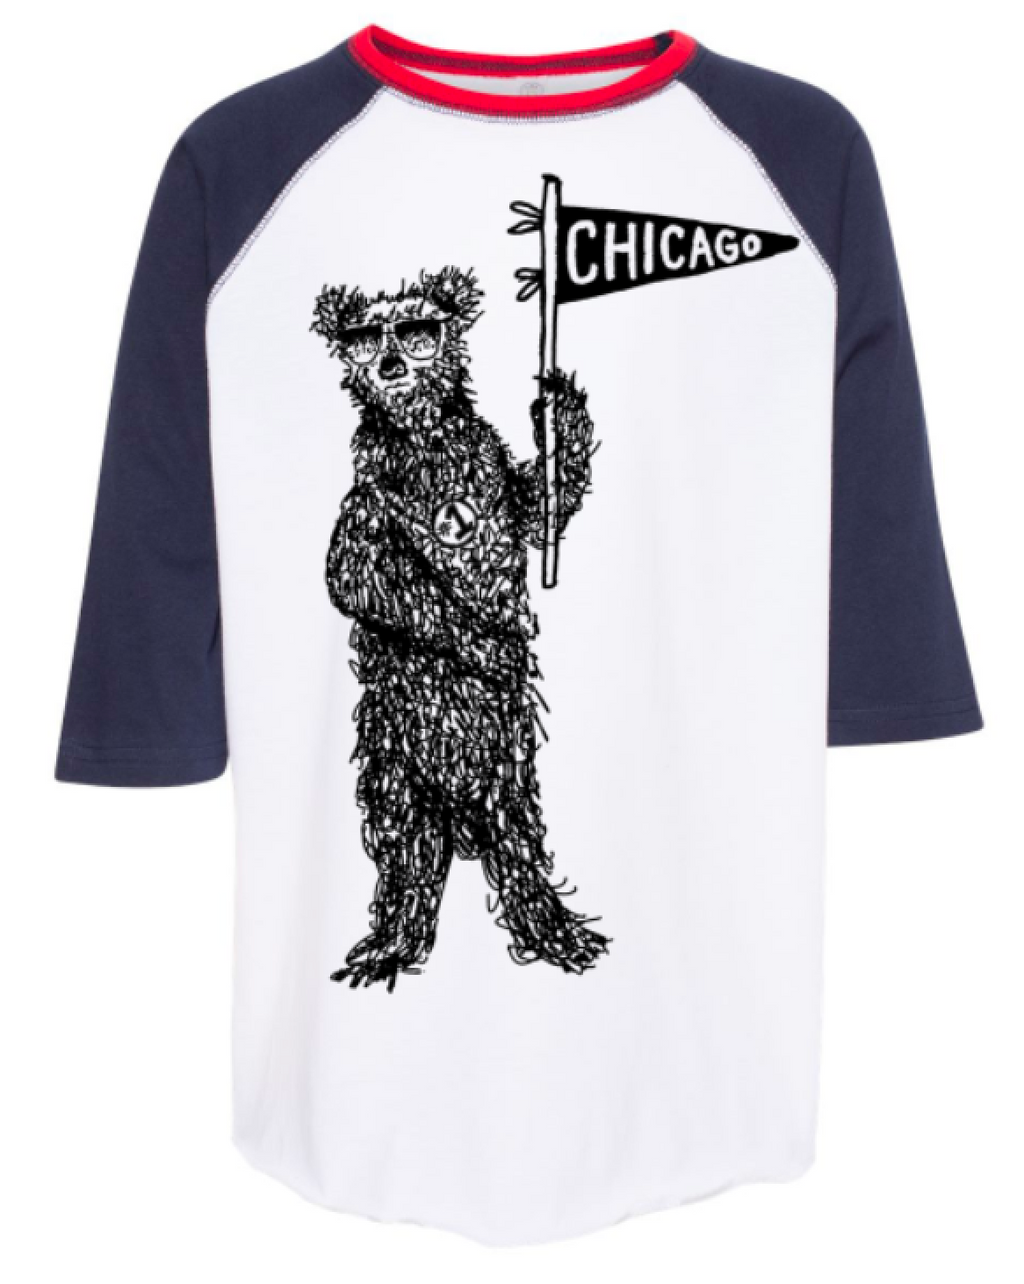 a white and blue baseball shirt with a bear holding a street sign